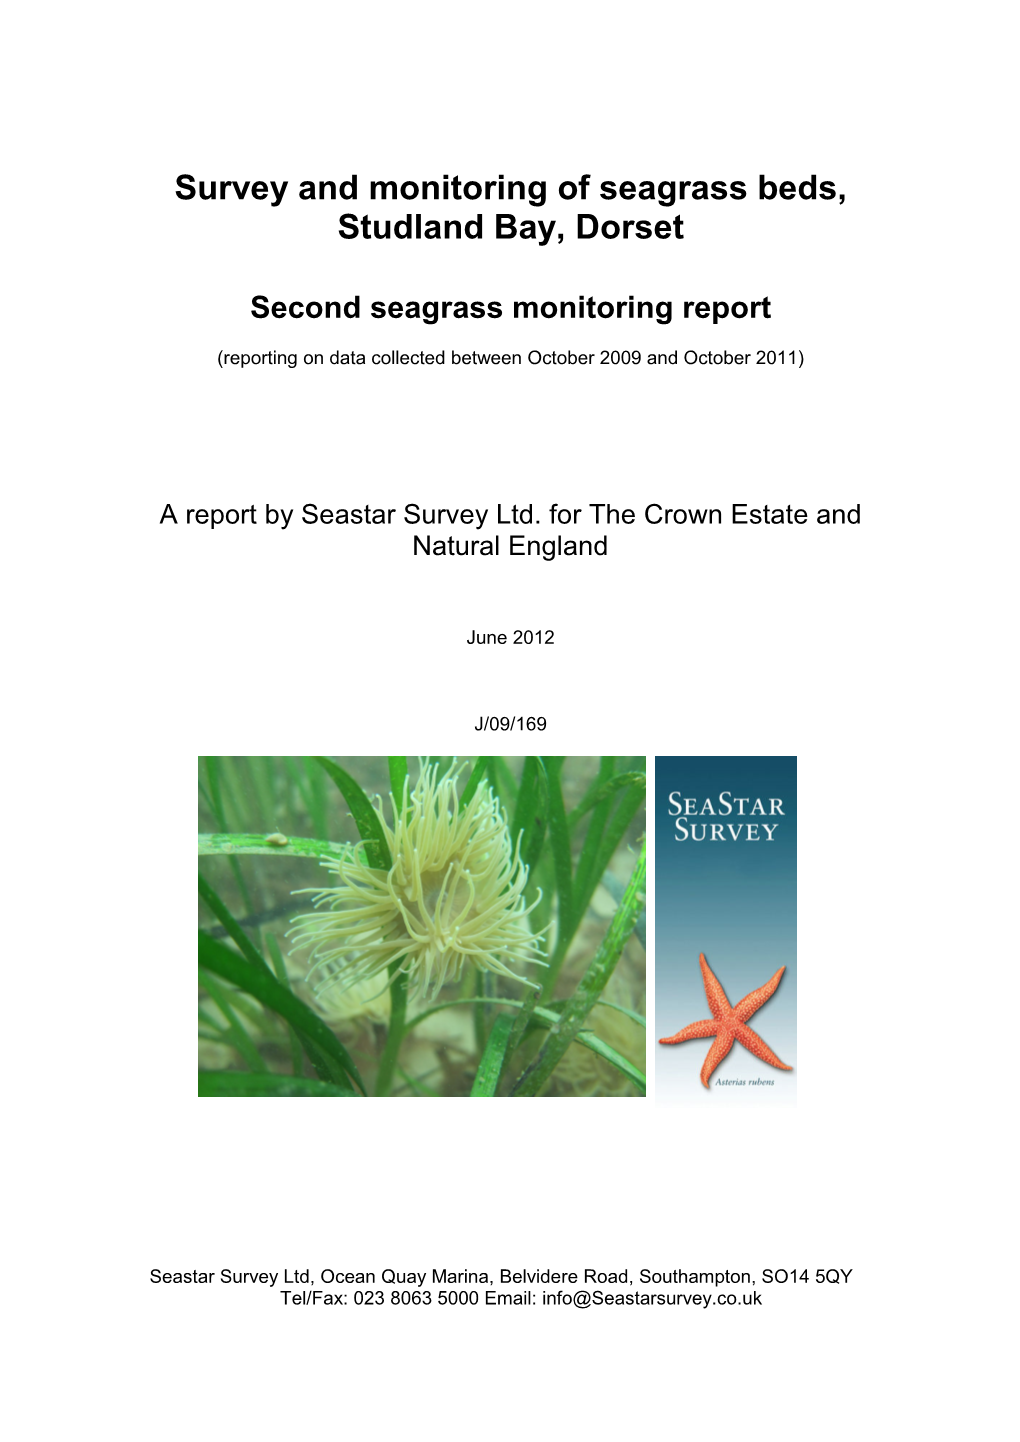 Survey and Monitoring of Seagrass Beds, Studland Bay, Dorset